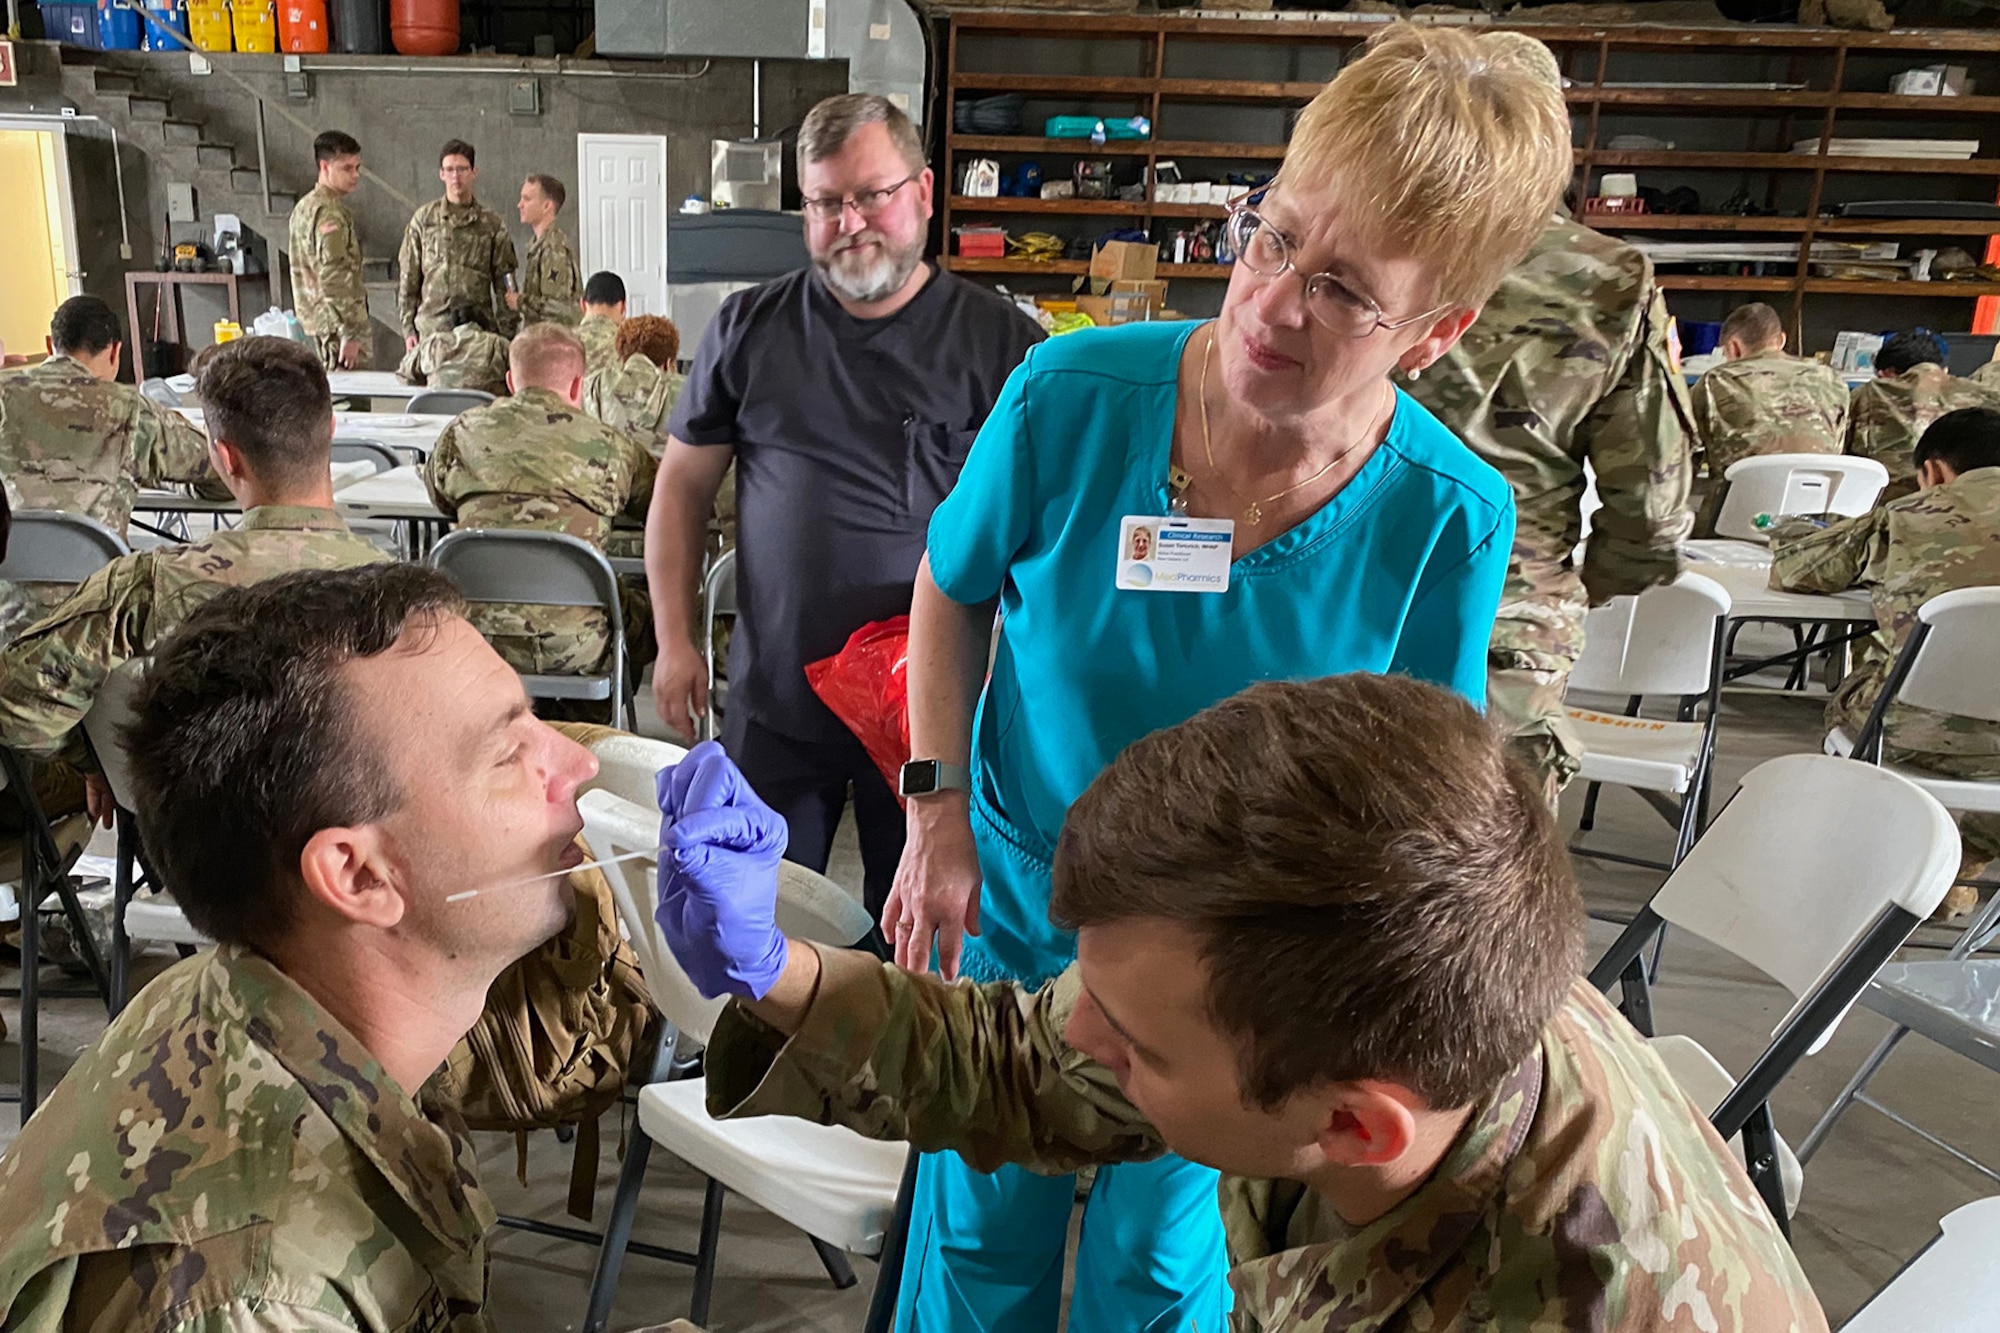 Louisiana National Guard medics, from both the Air and Army, conduct training with the Department of Health and Human Services to ensure proper protection and administration of test kits occurs during drive-thru testing, March 18, 2020, in New Orleans. (Photo by Maj. John Meche)